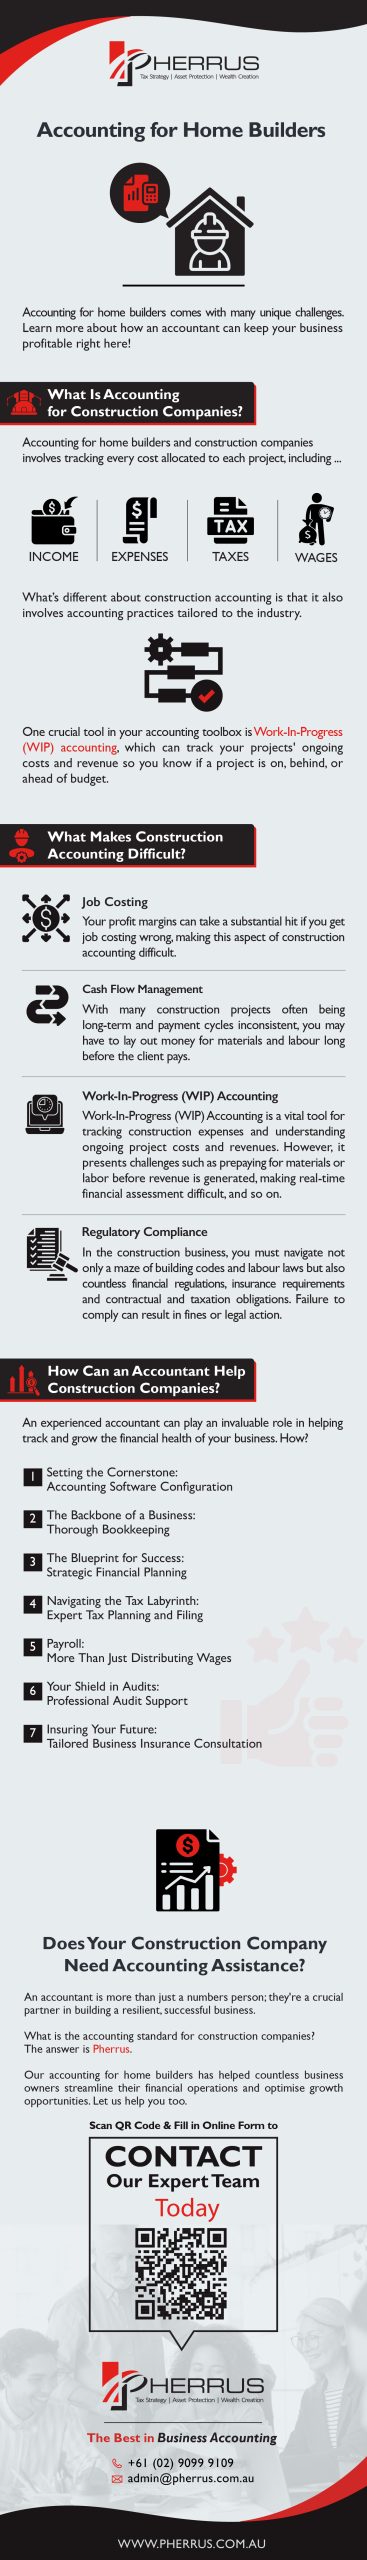 Accounting for Home Builders Infographic